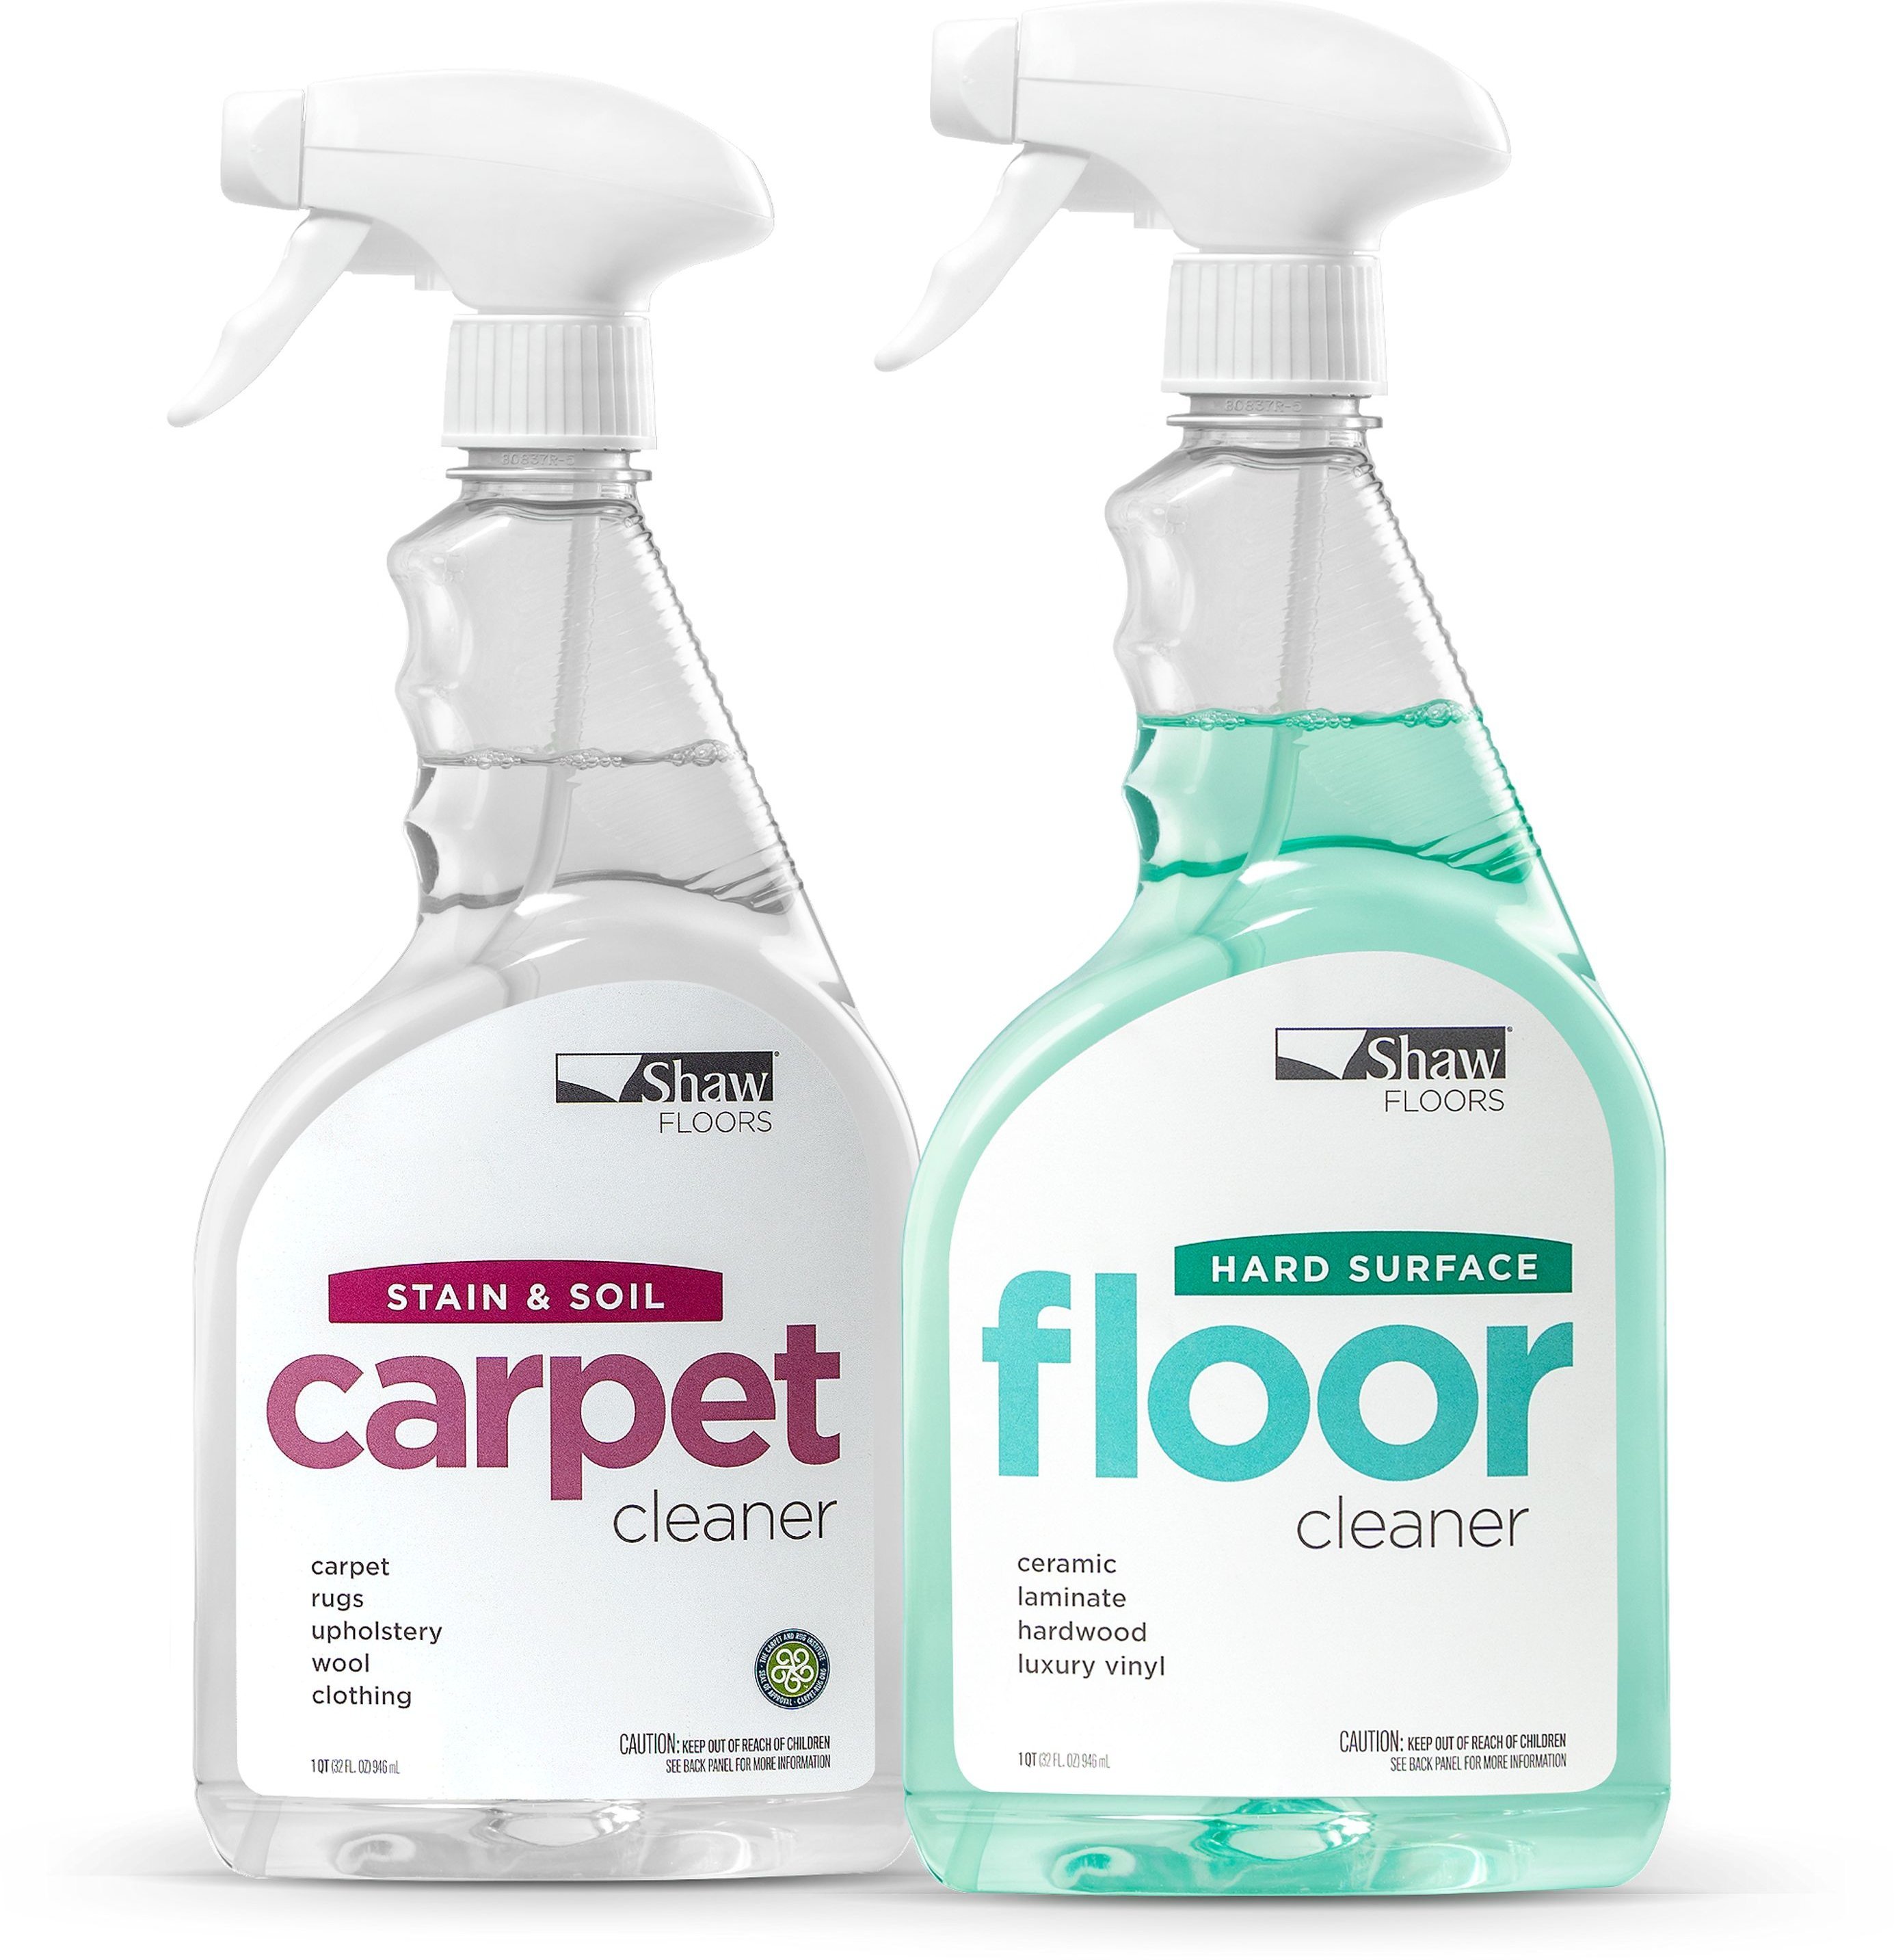 carpet cleaning products from Nationwide Carpet in Mount Juliet